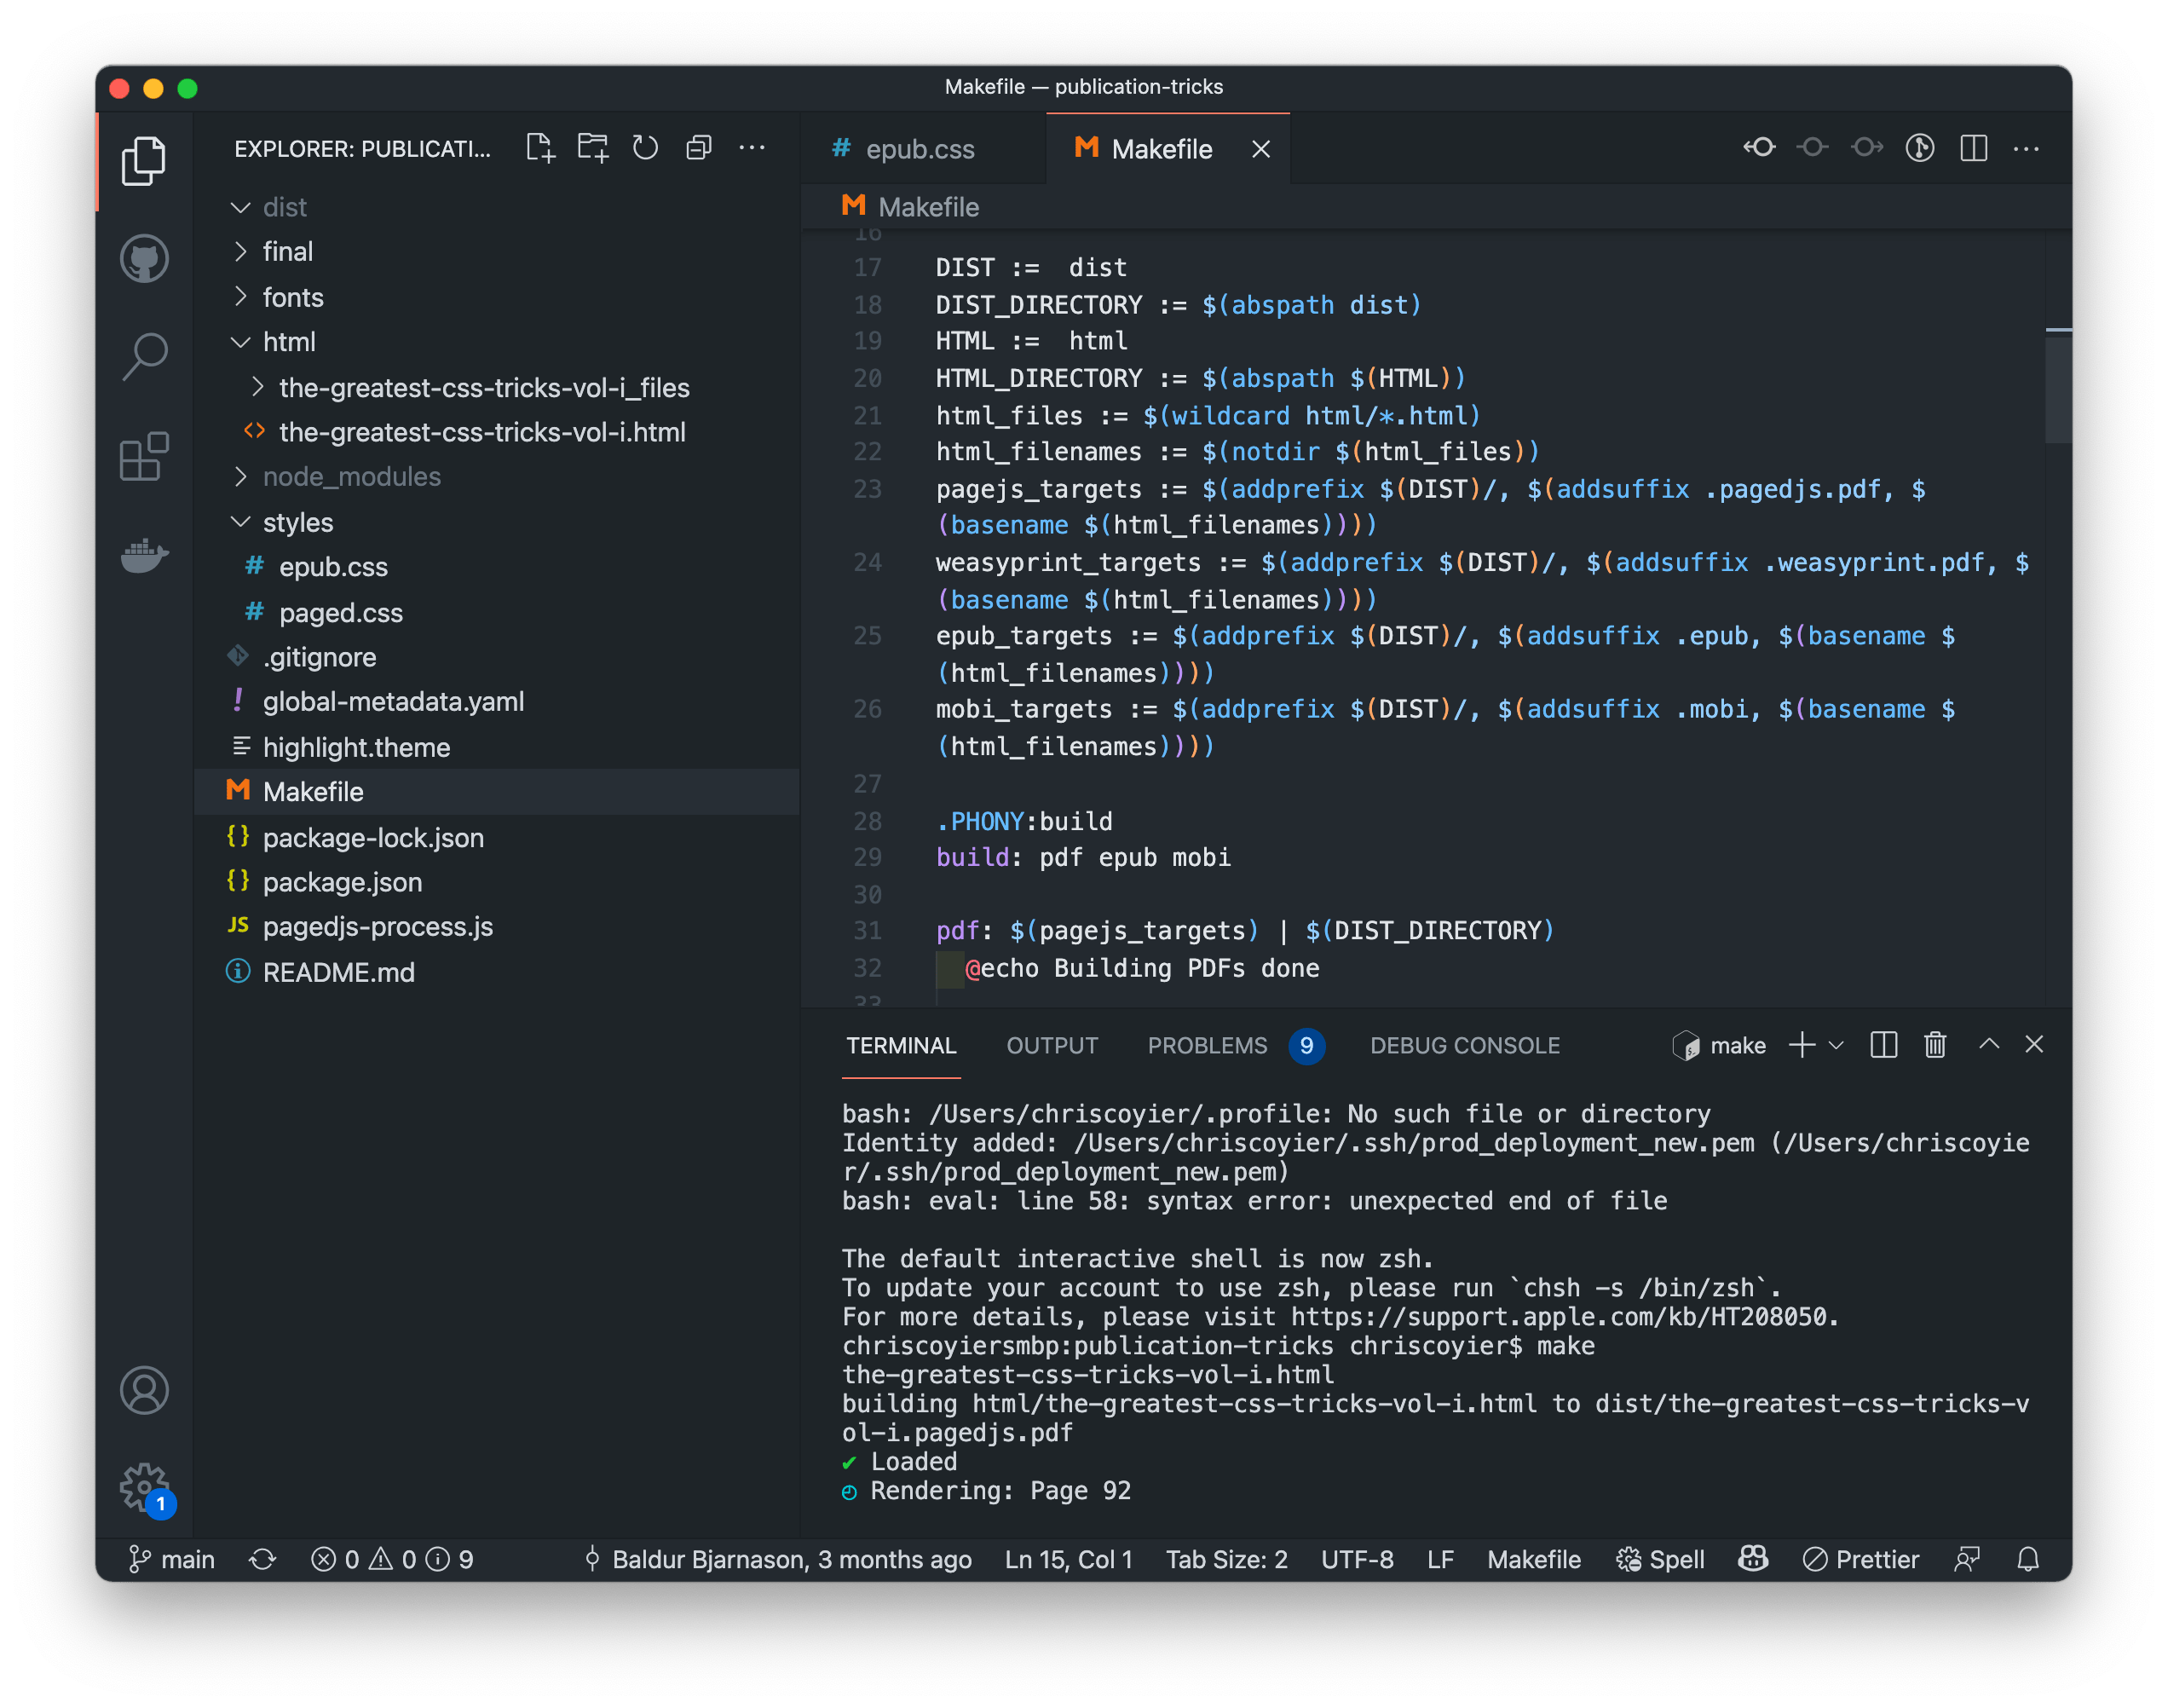 VS Code showing there terminal open running a Makefile script producing the eBooks.